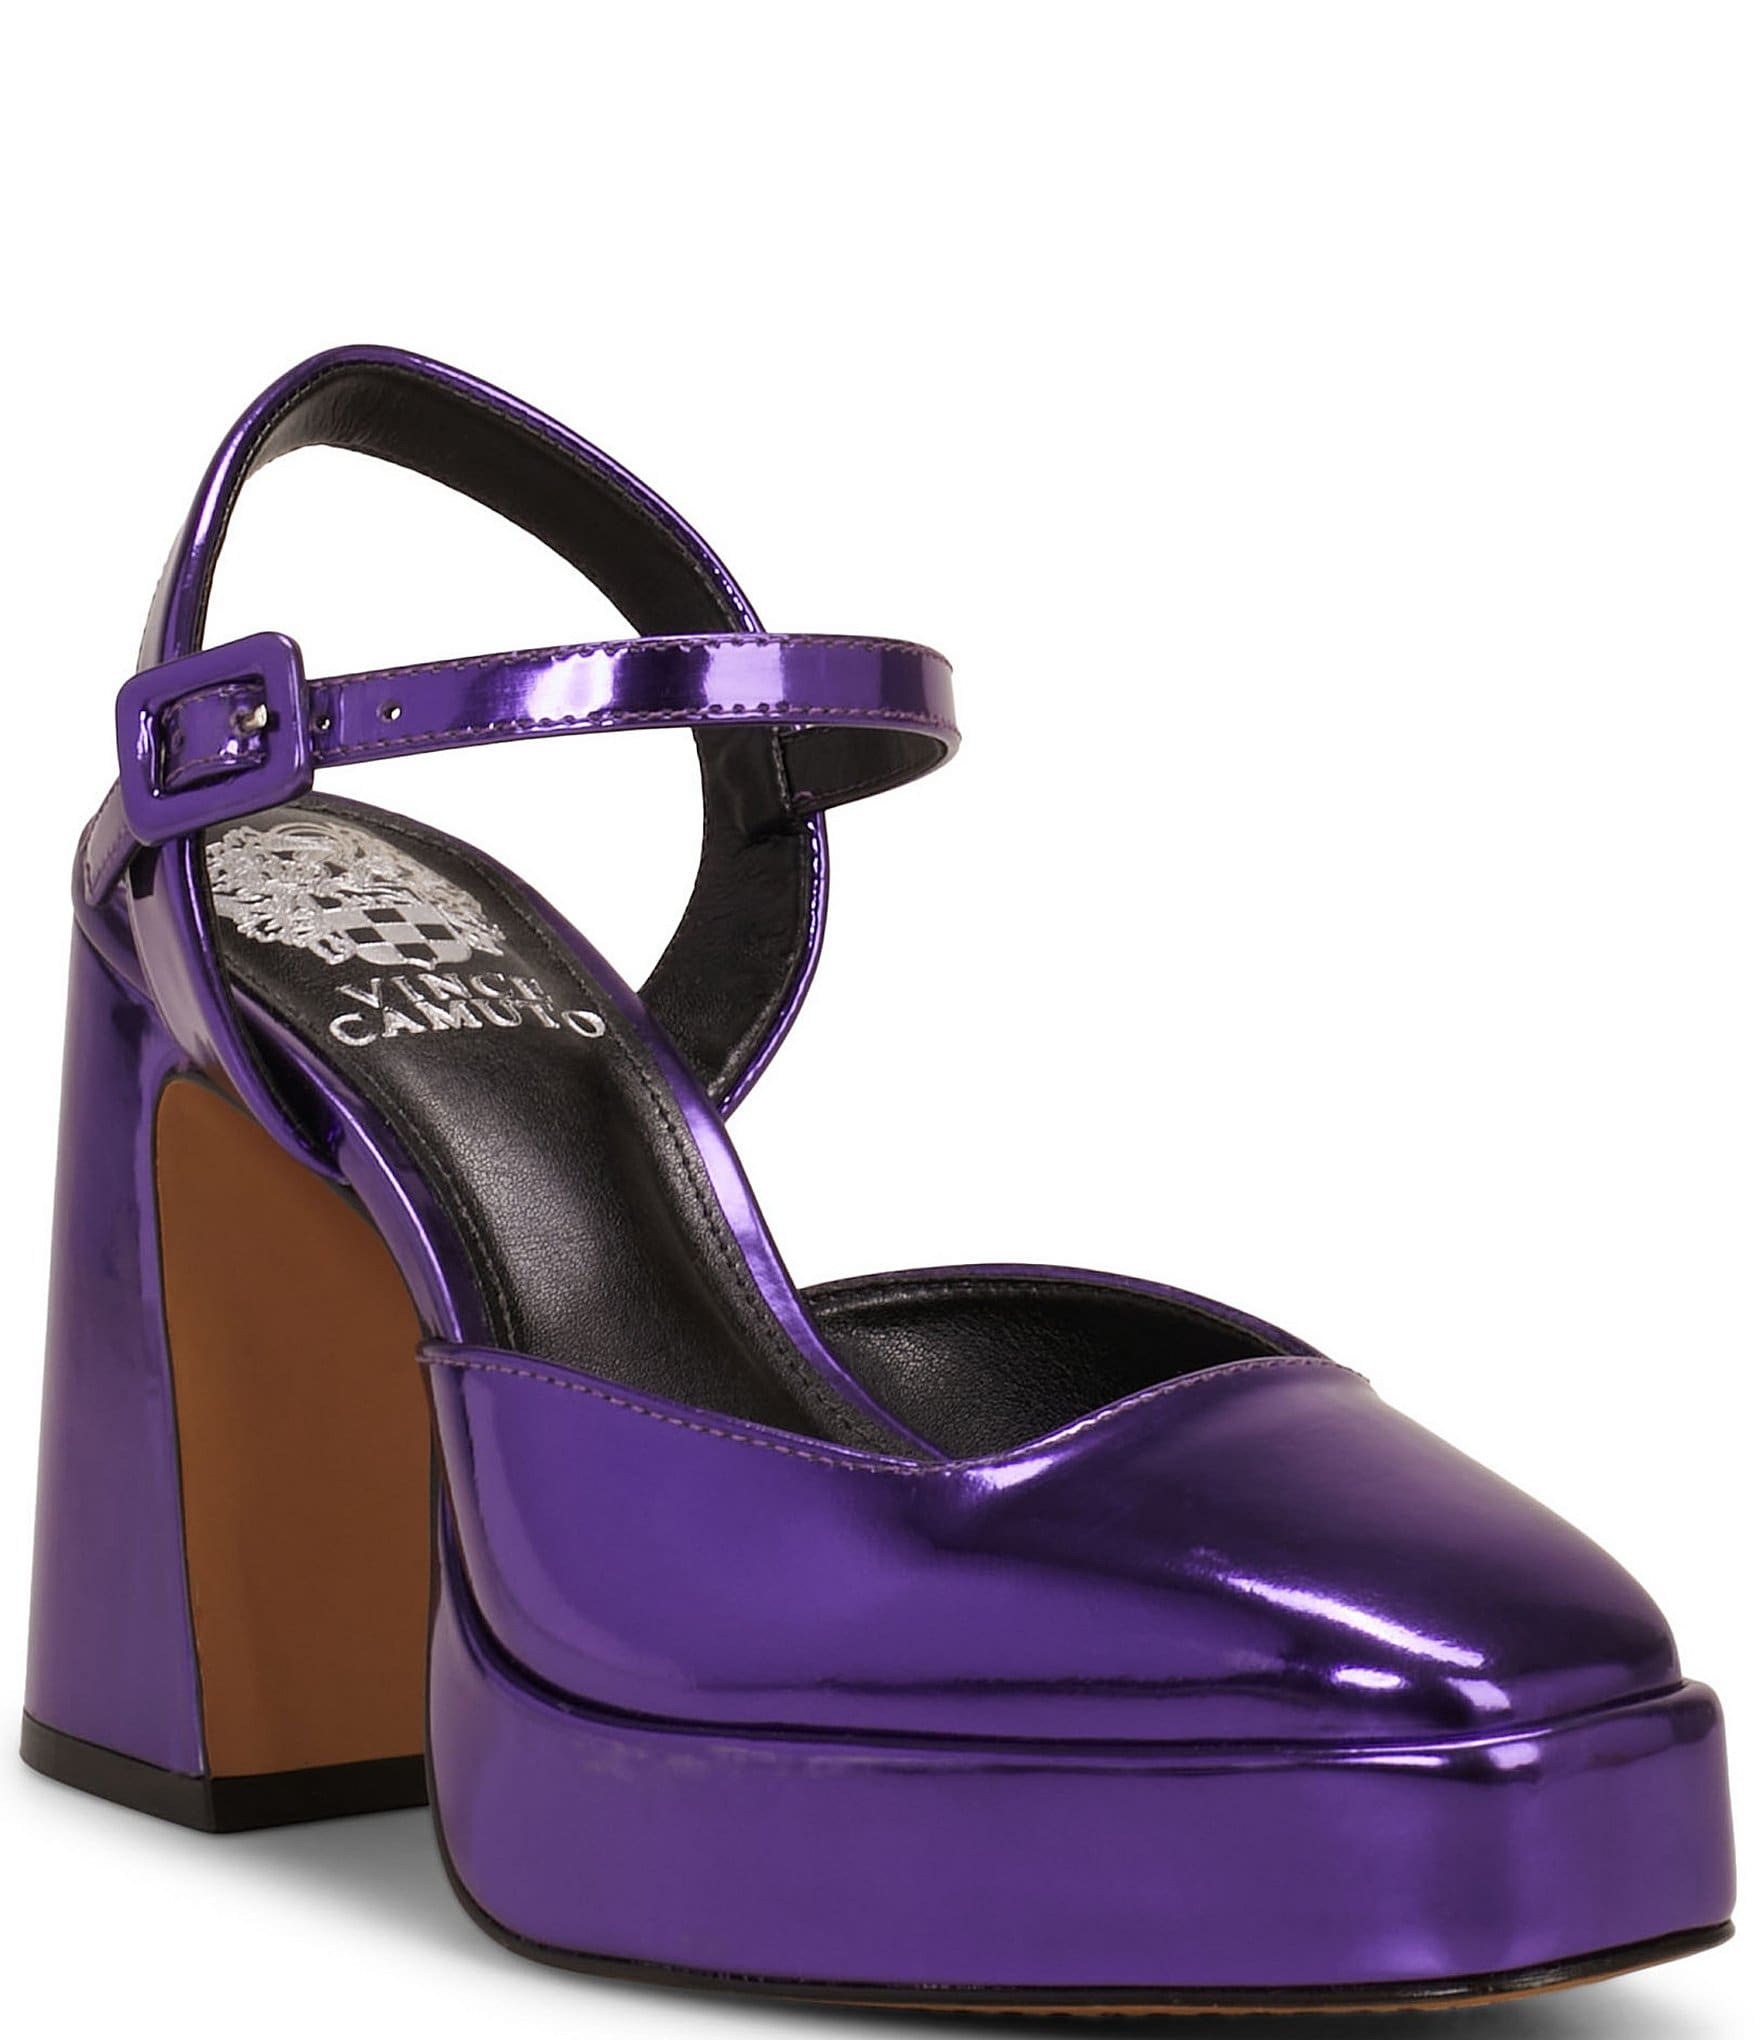 The Mable Ankle-Strap Platform Pump in Leather